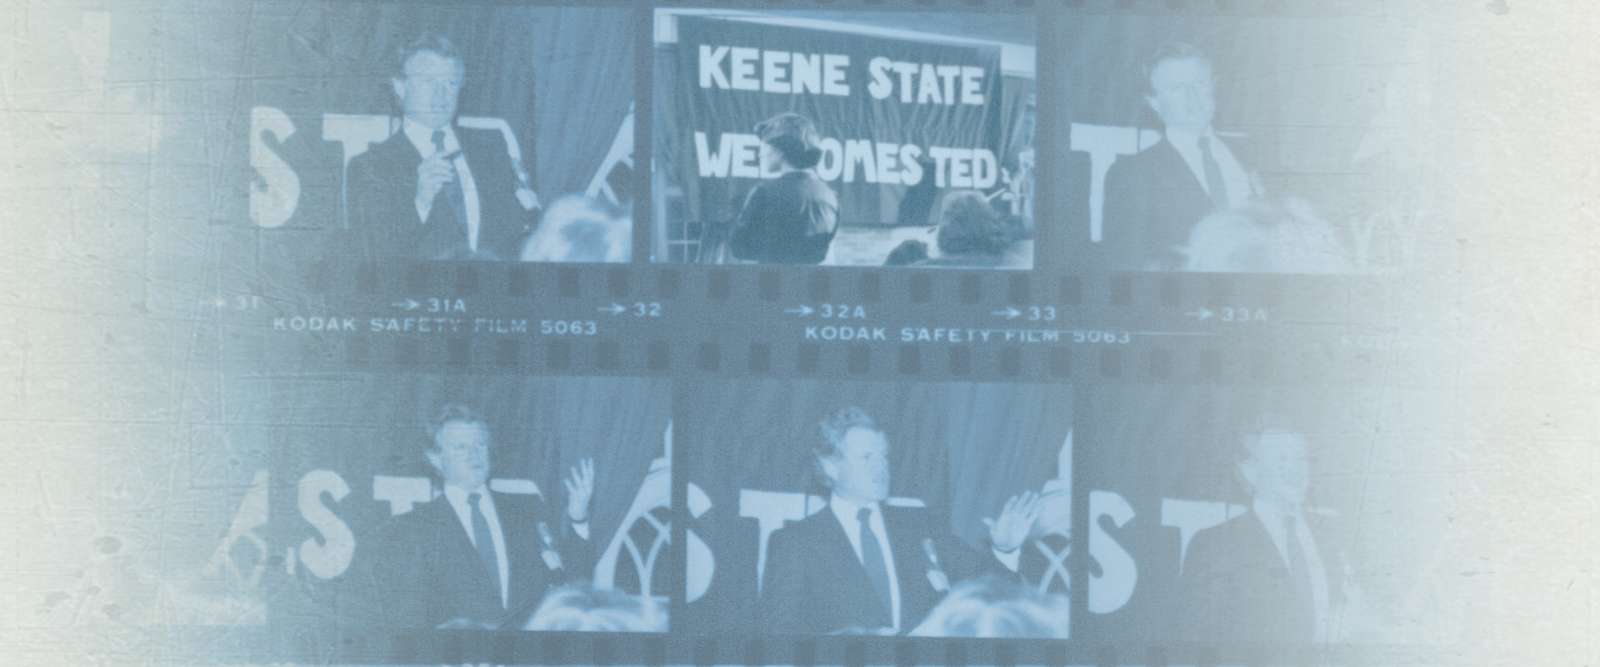 Old film of Ted Kennedy on campus